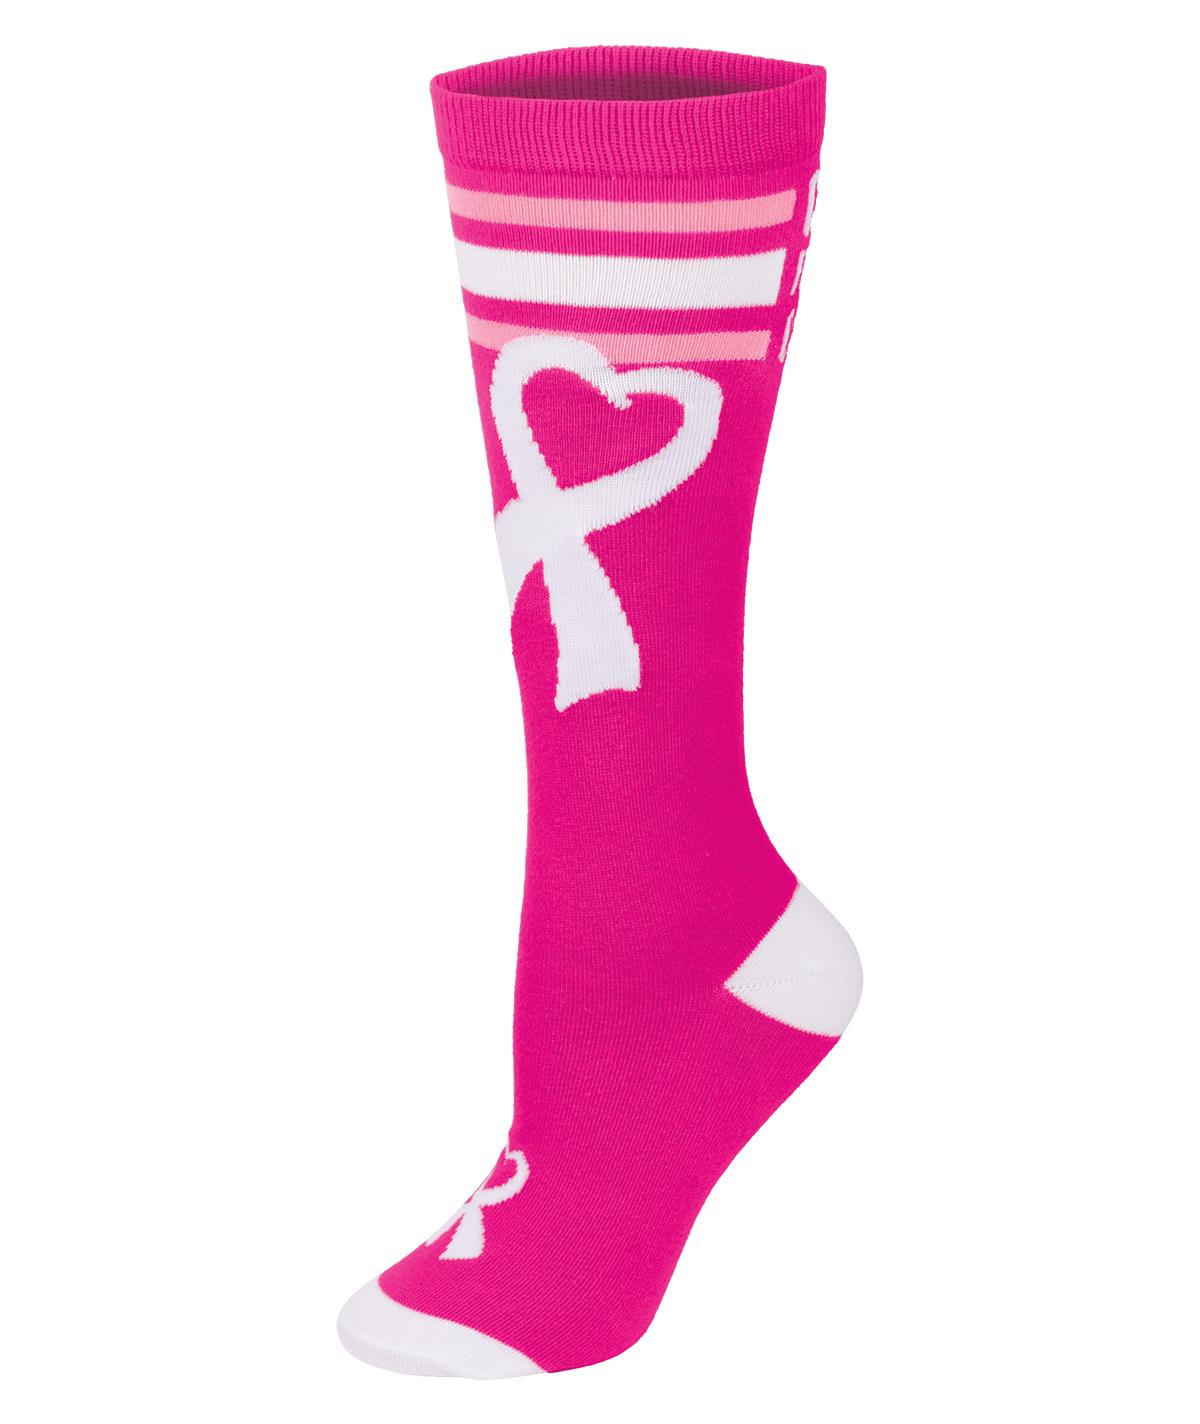 Chasse Cheer for the Cause Ribbon Knee-High Sock